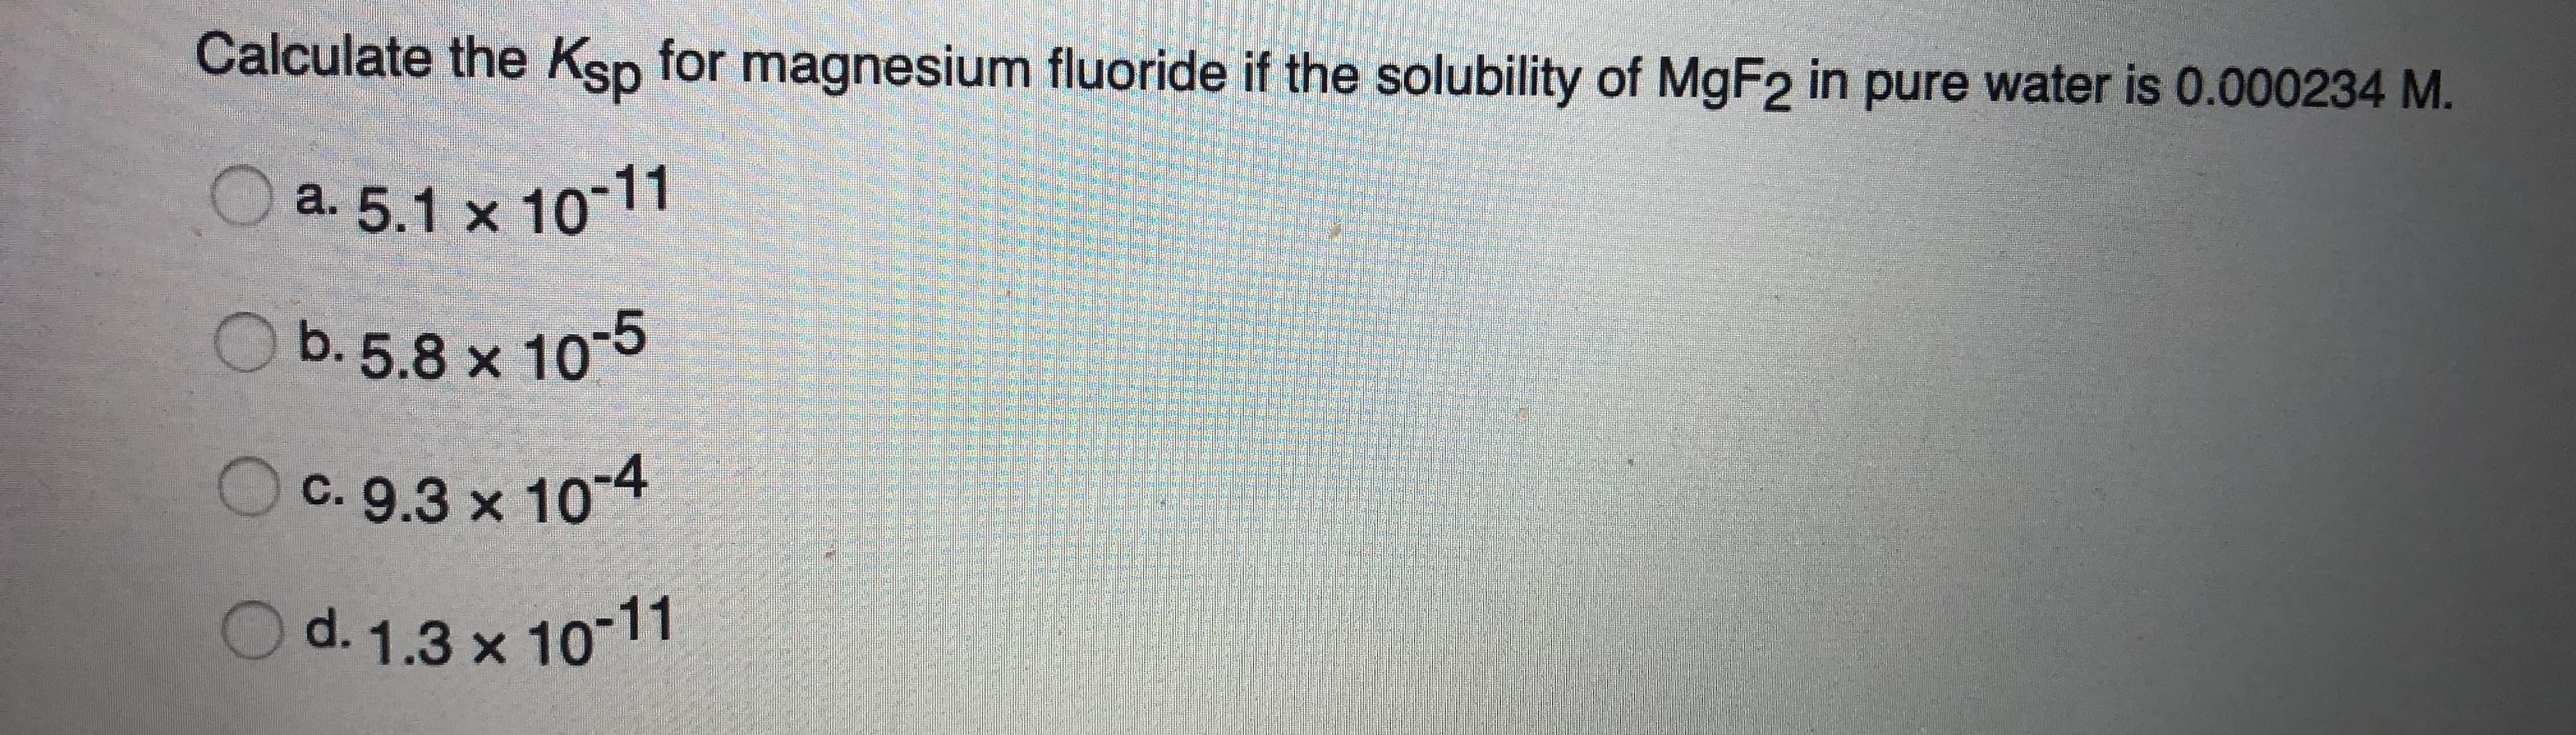 Calculate the Ksp for magnesium fluoride if the solubility of MGF2 in pure water is 0.000234 M.
a. 5.1 x 10-11
O b.5.8 x 10-5
C. 9.3 x 10-4
d. 1.3 x 10-11
